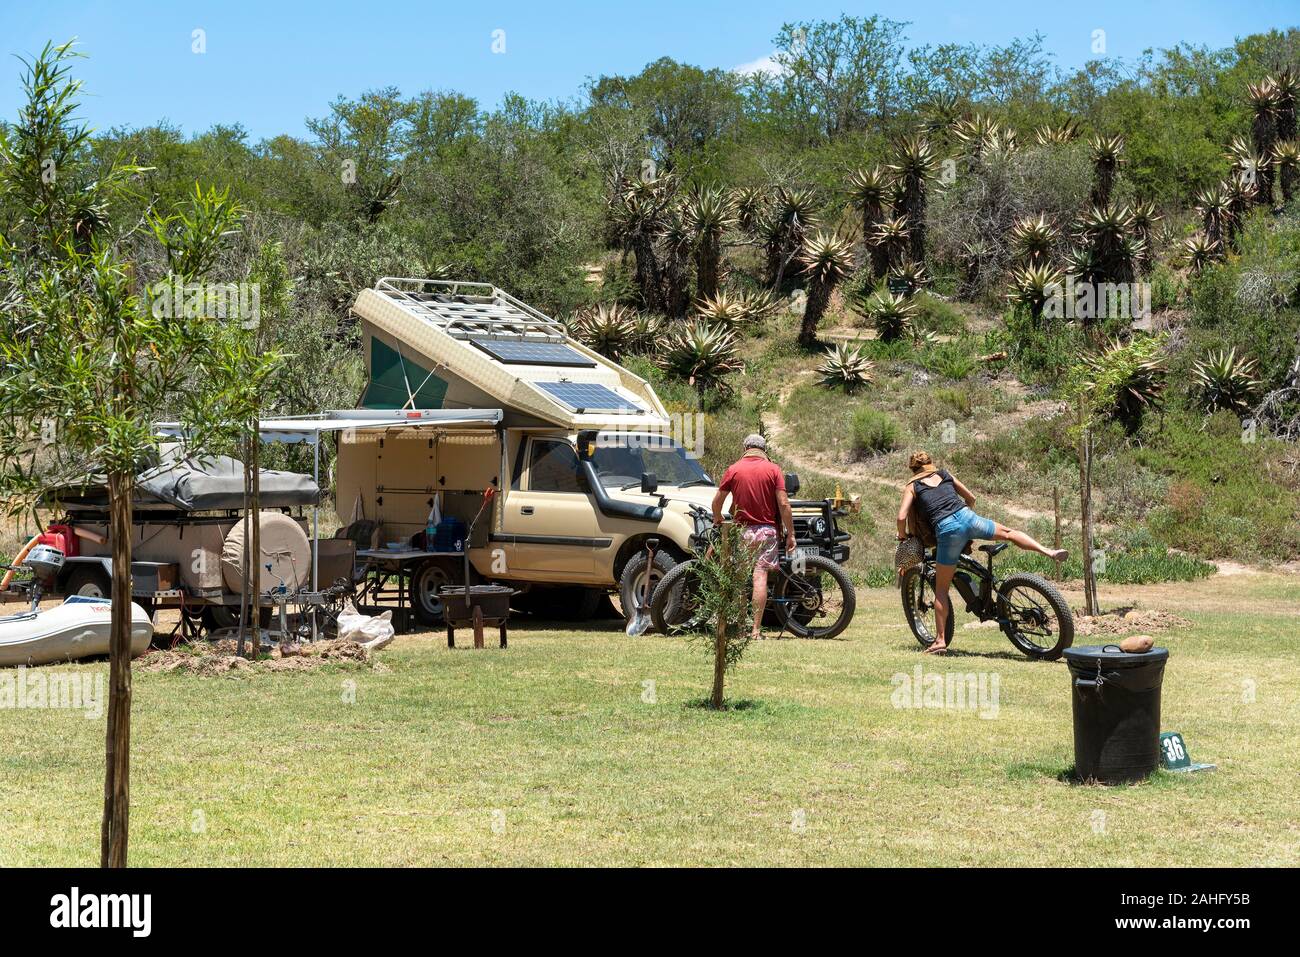 Swellendam, Western Cape, South Africa, December 2019. Couple with cycles on a campsite along the Garden Route at Swellendam, South Africa Stock Photo